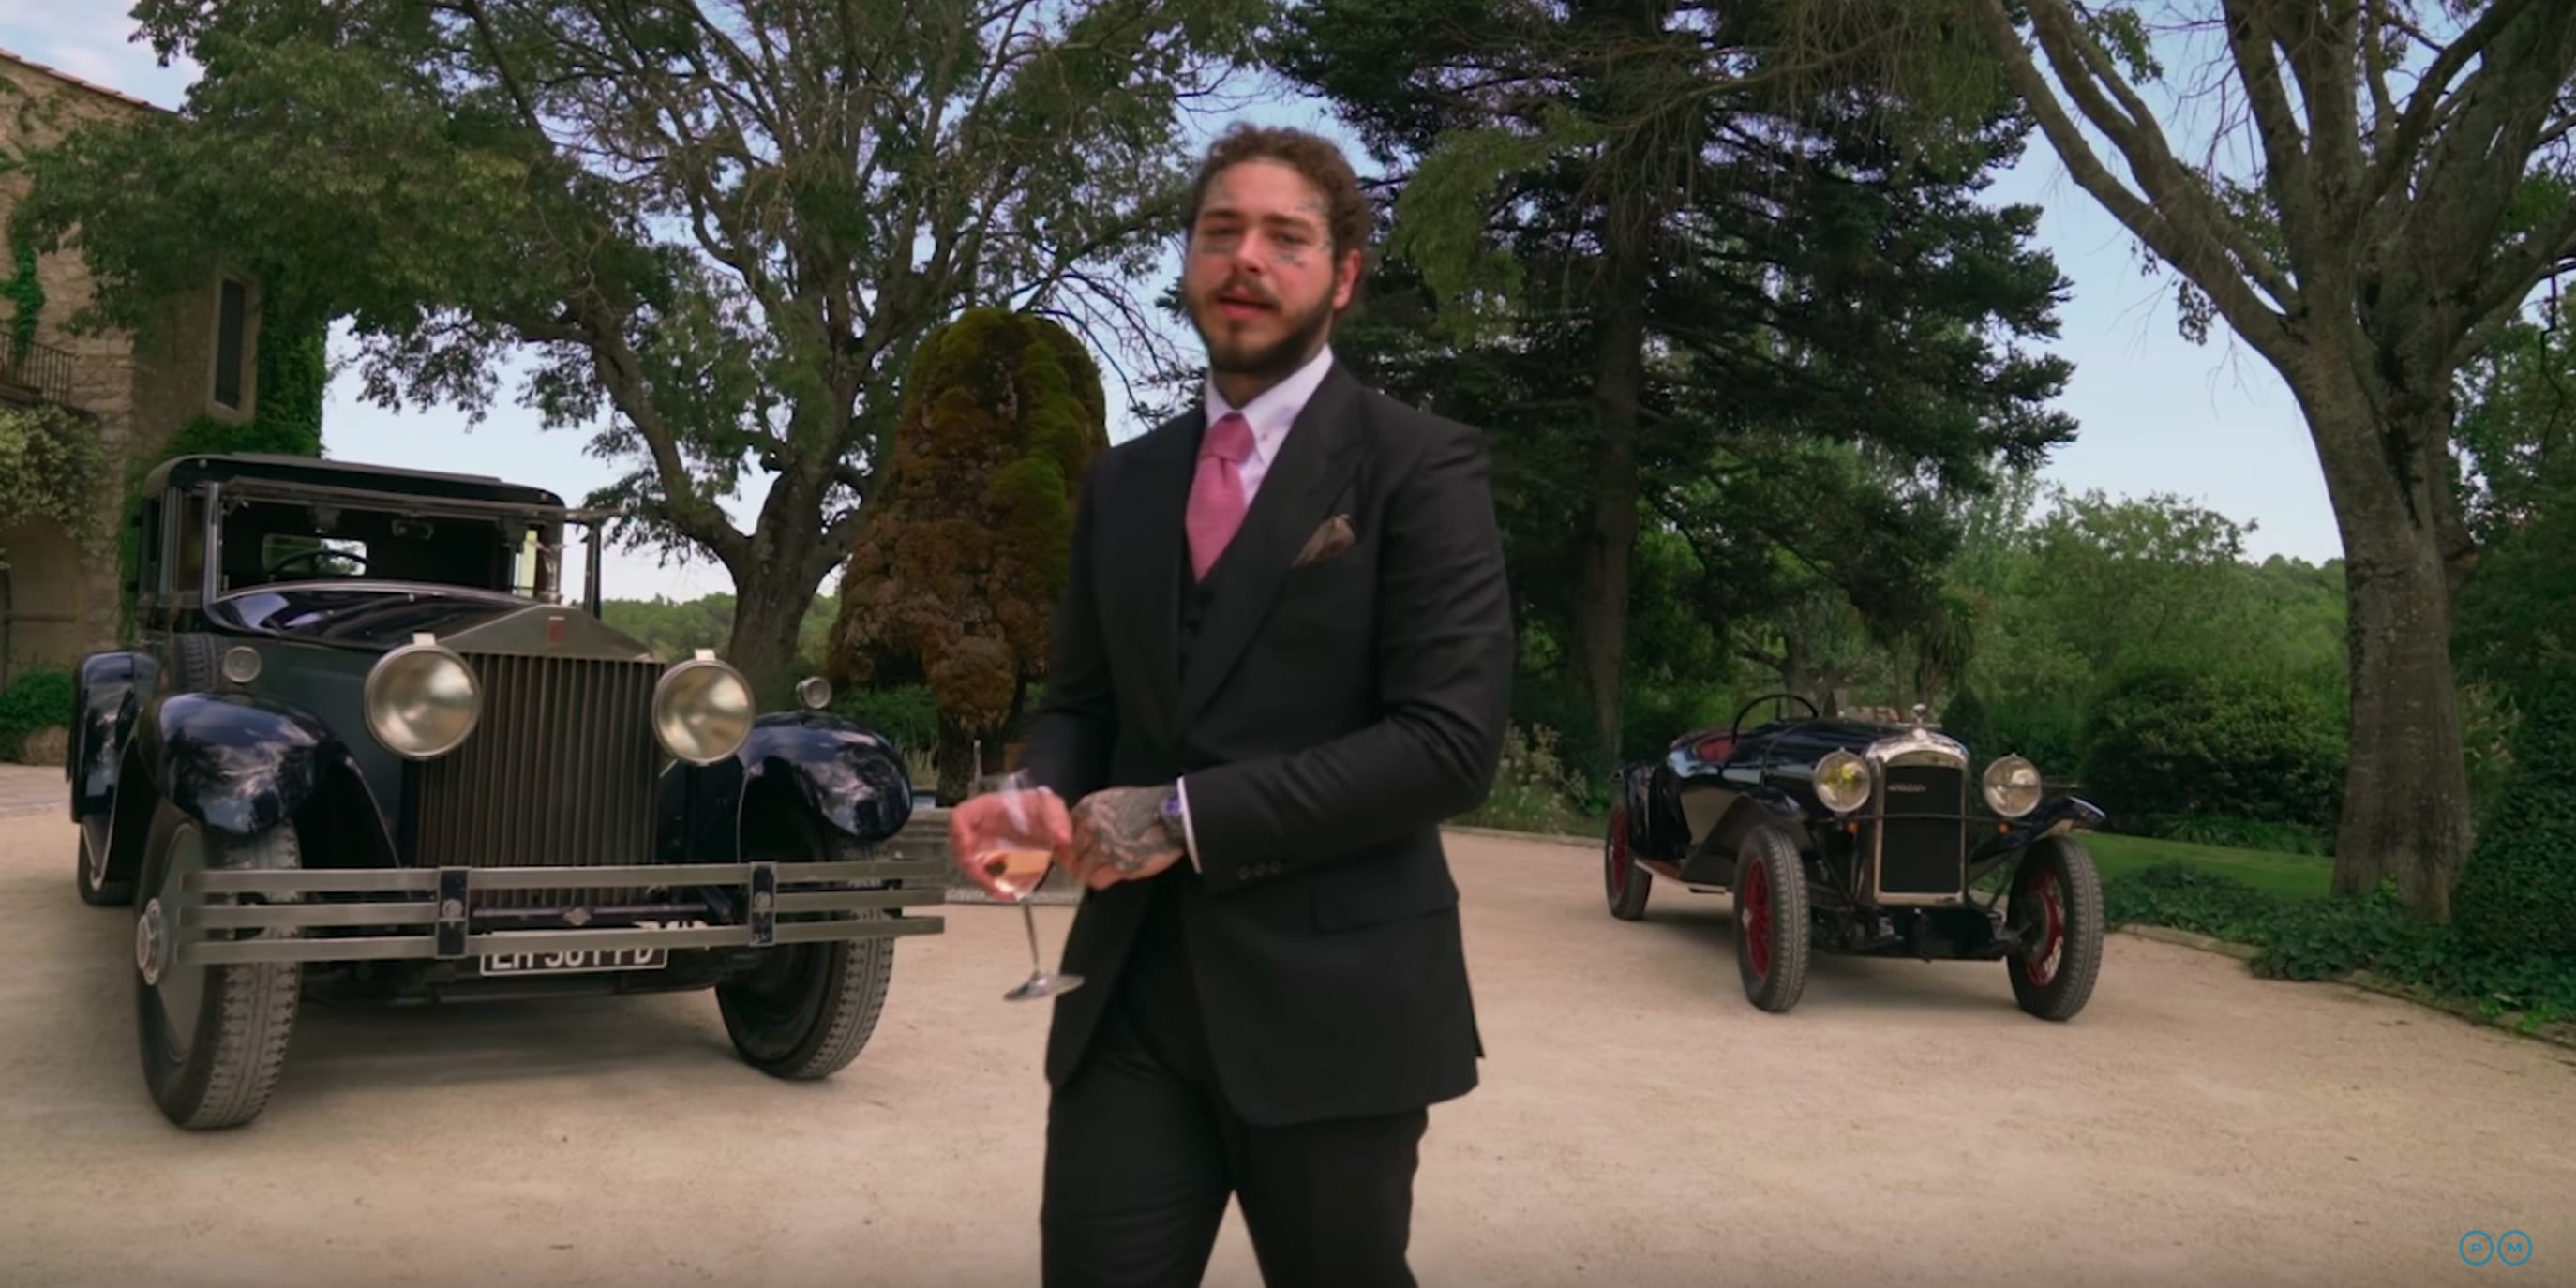 Post Malone - Saint-Tropez (Official Video): Clothes, Outfits